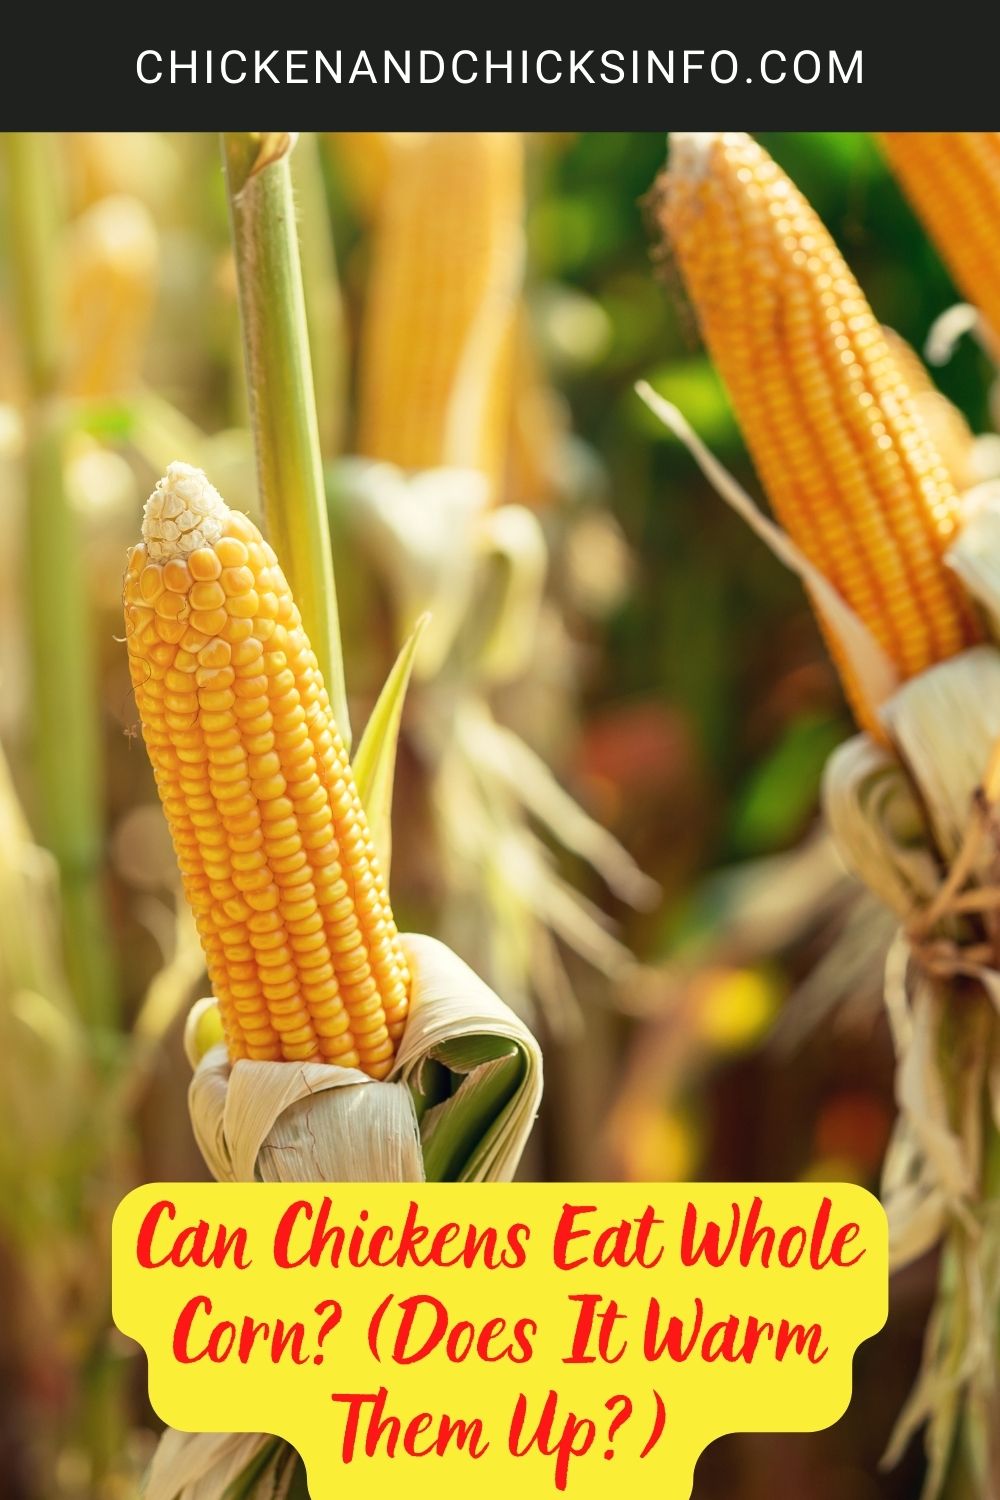 Can Chickens Eat Whole Corn? (Does It Warm Them Up?) poster.
